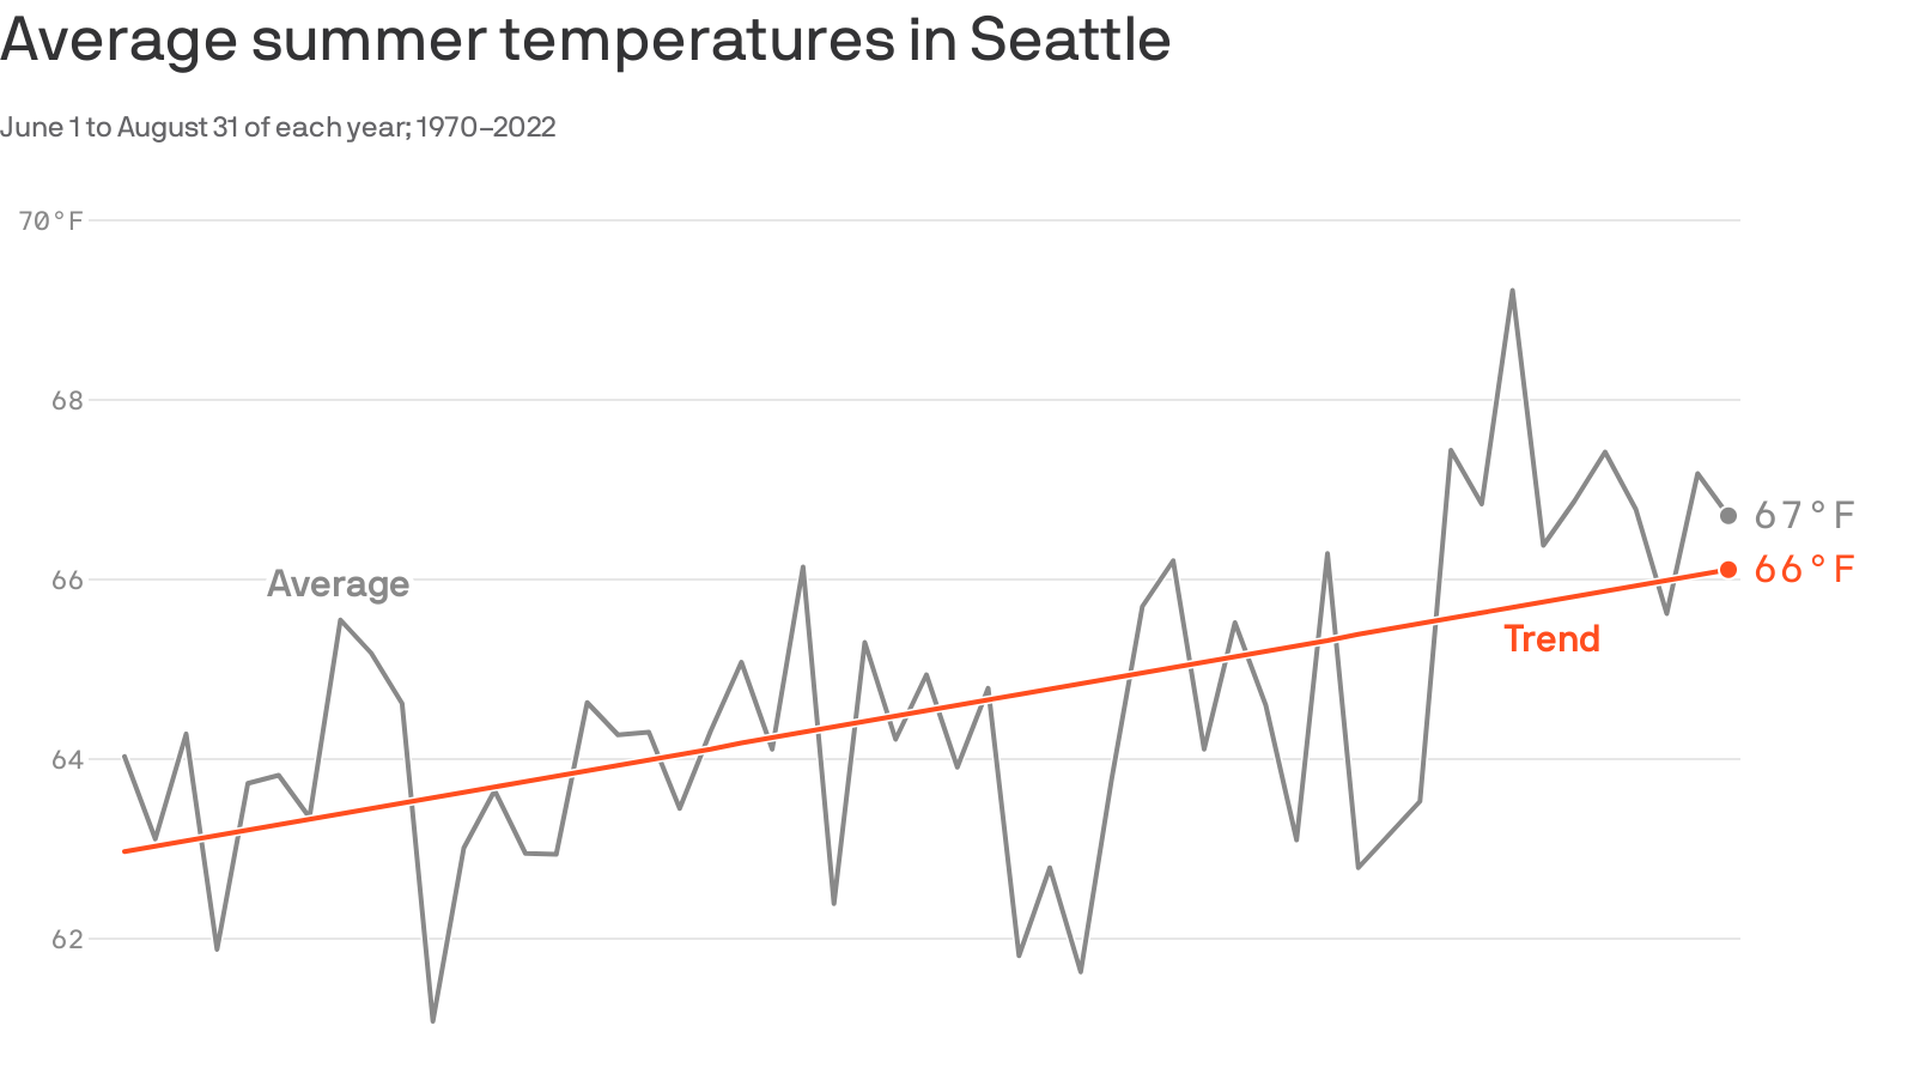 A line chart showing increasing average summer temperatures in Seattle from 1970 to 2022, with the trend line at about 63 degrees Fahrenheit in 1970 compared to about 66 degrees Fahrenheit in 2022. 